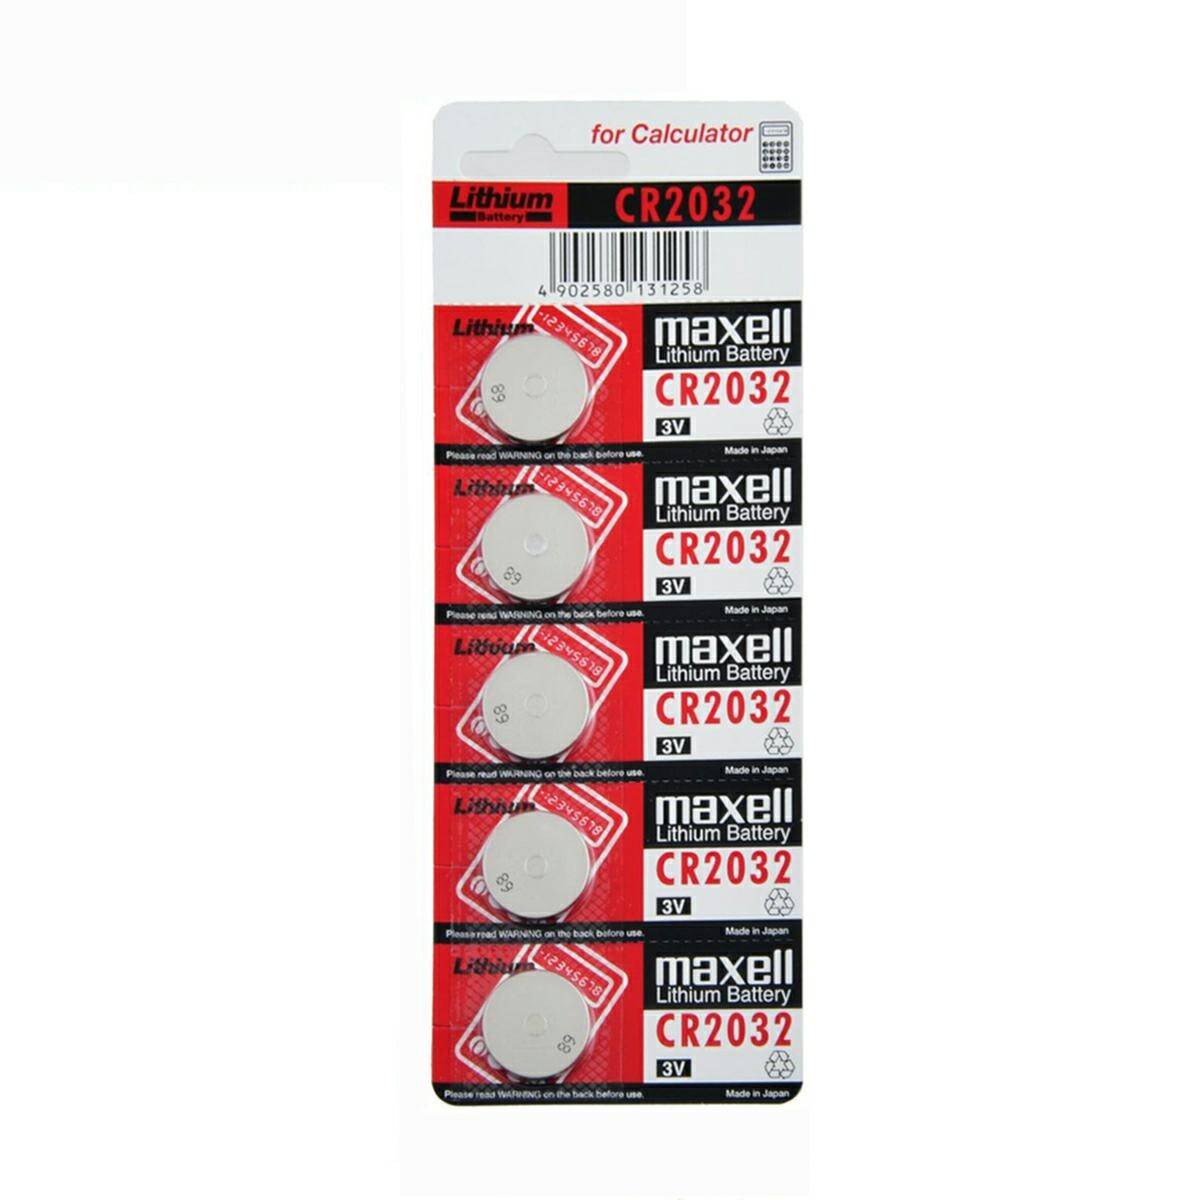  Maxell Micro Lithium Cell CR2032 (pack of 5 Batteries